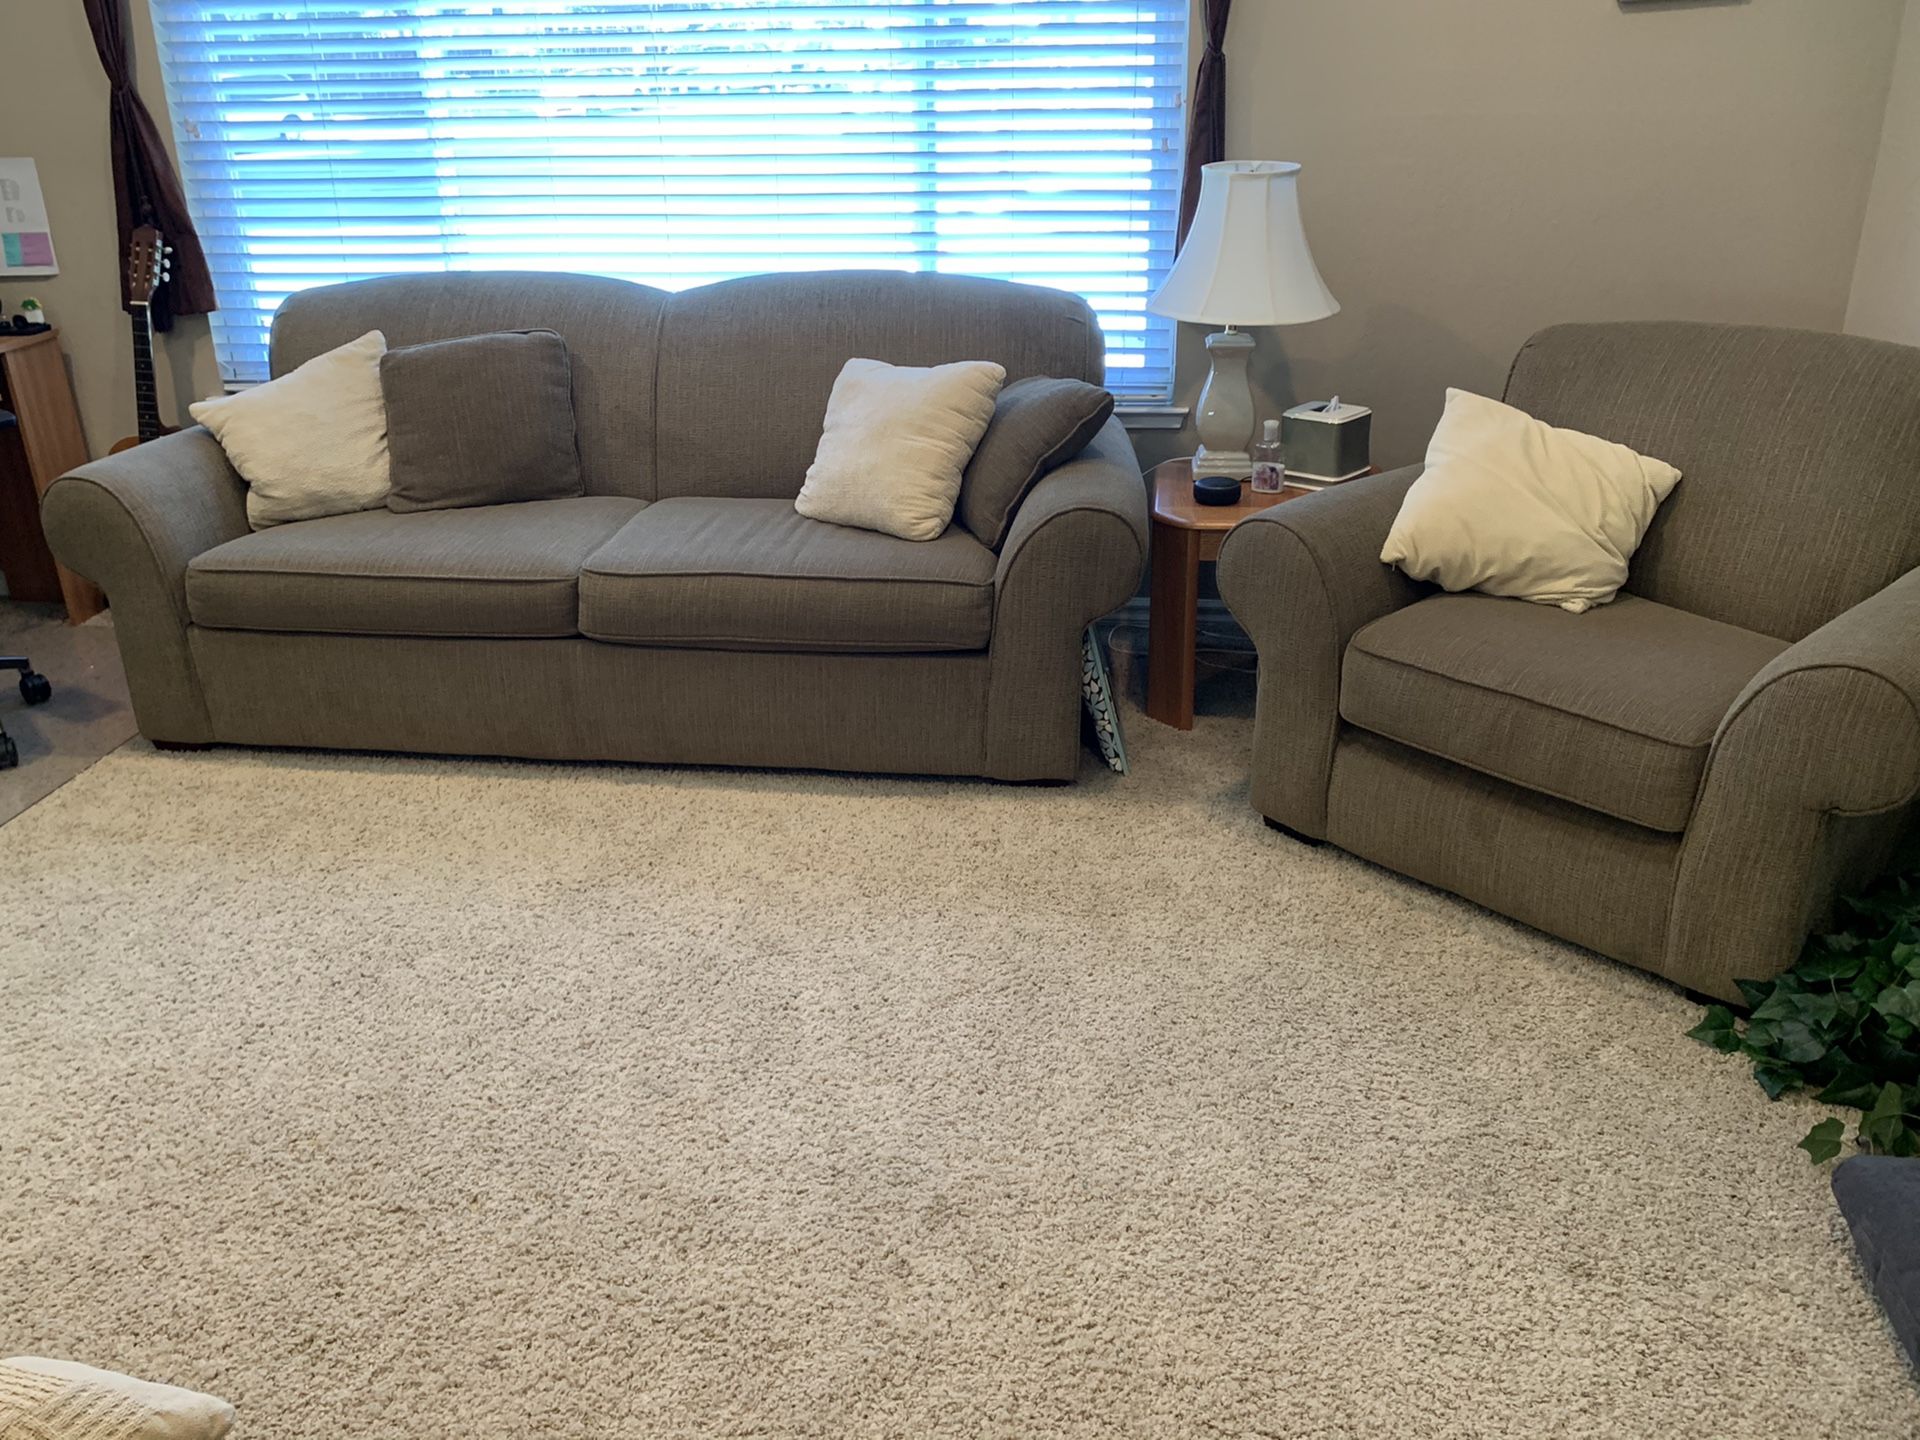 Living Room furniture, end tables - CASH/PayPal only please.